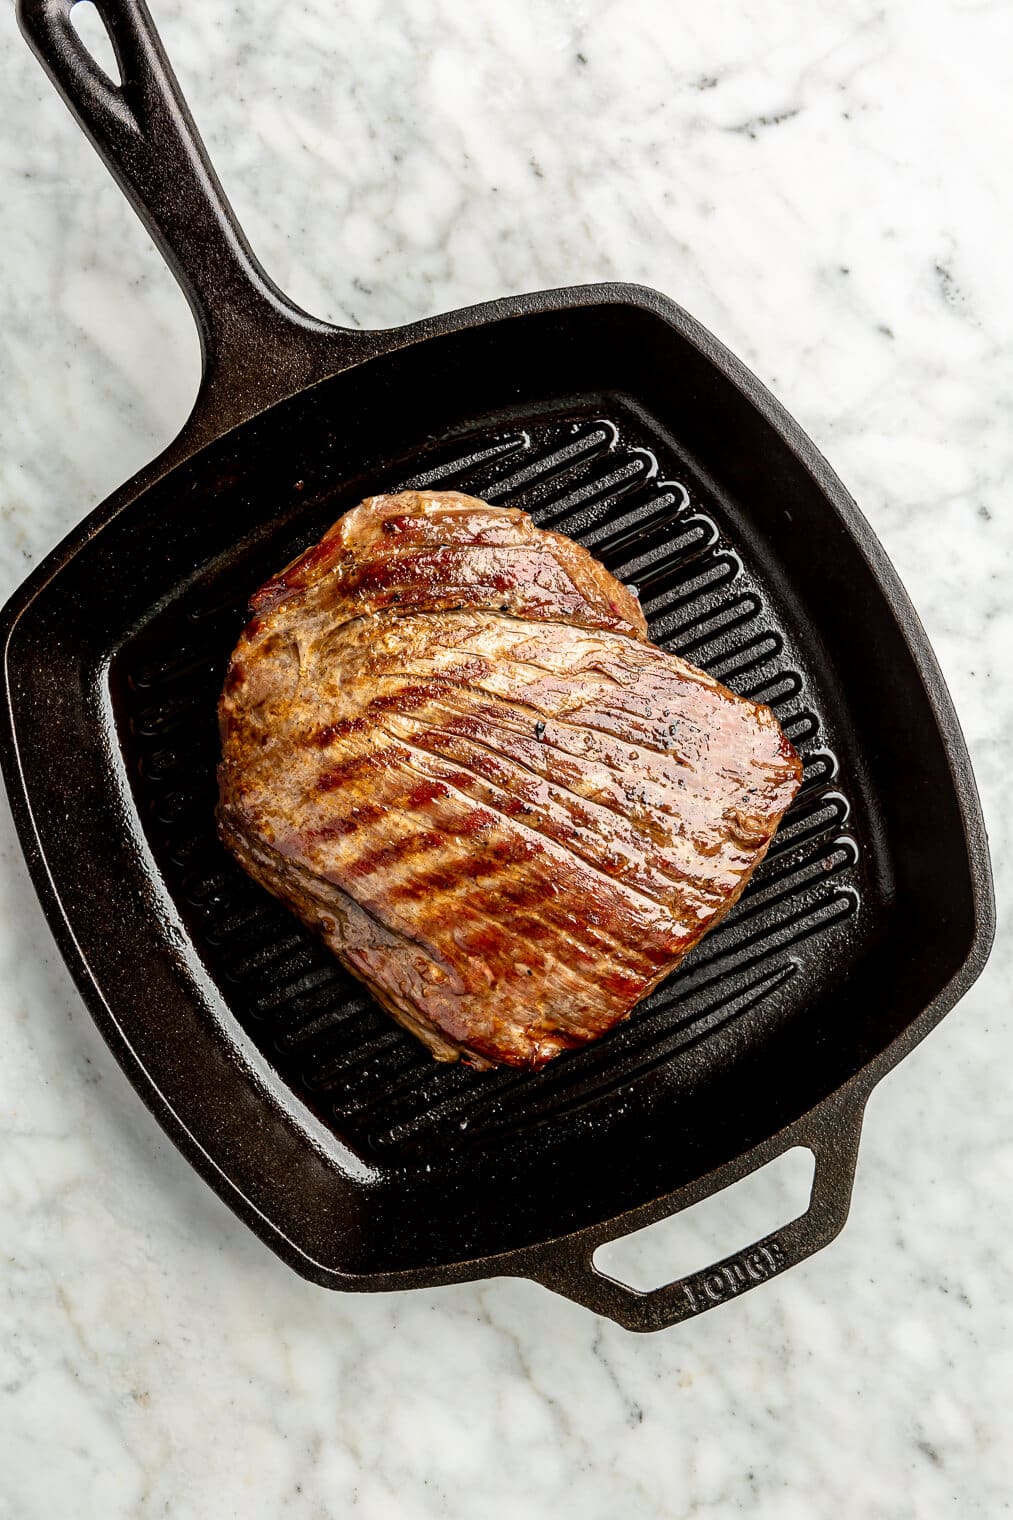 A flank steak being seared on a cast iron sear pan.